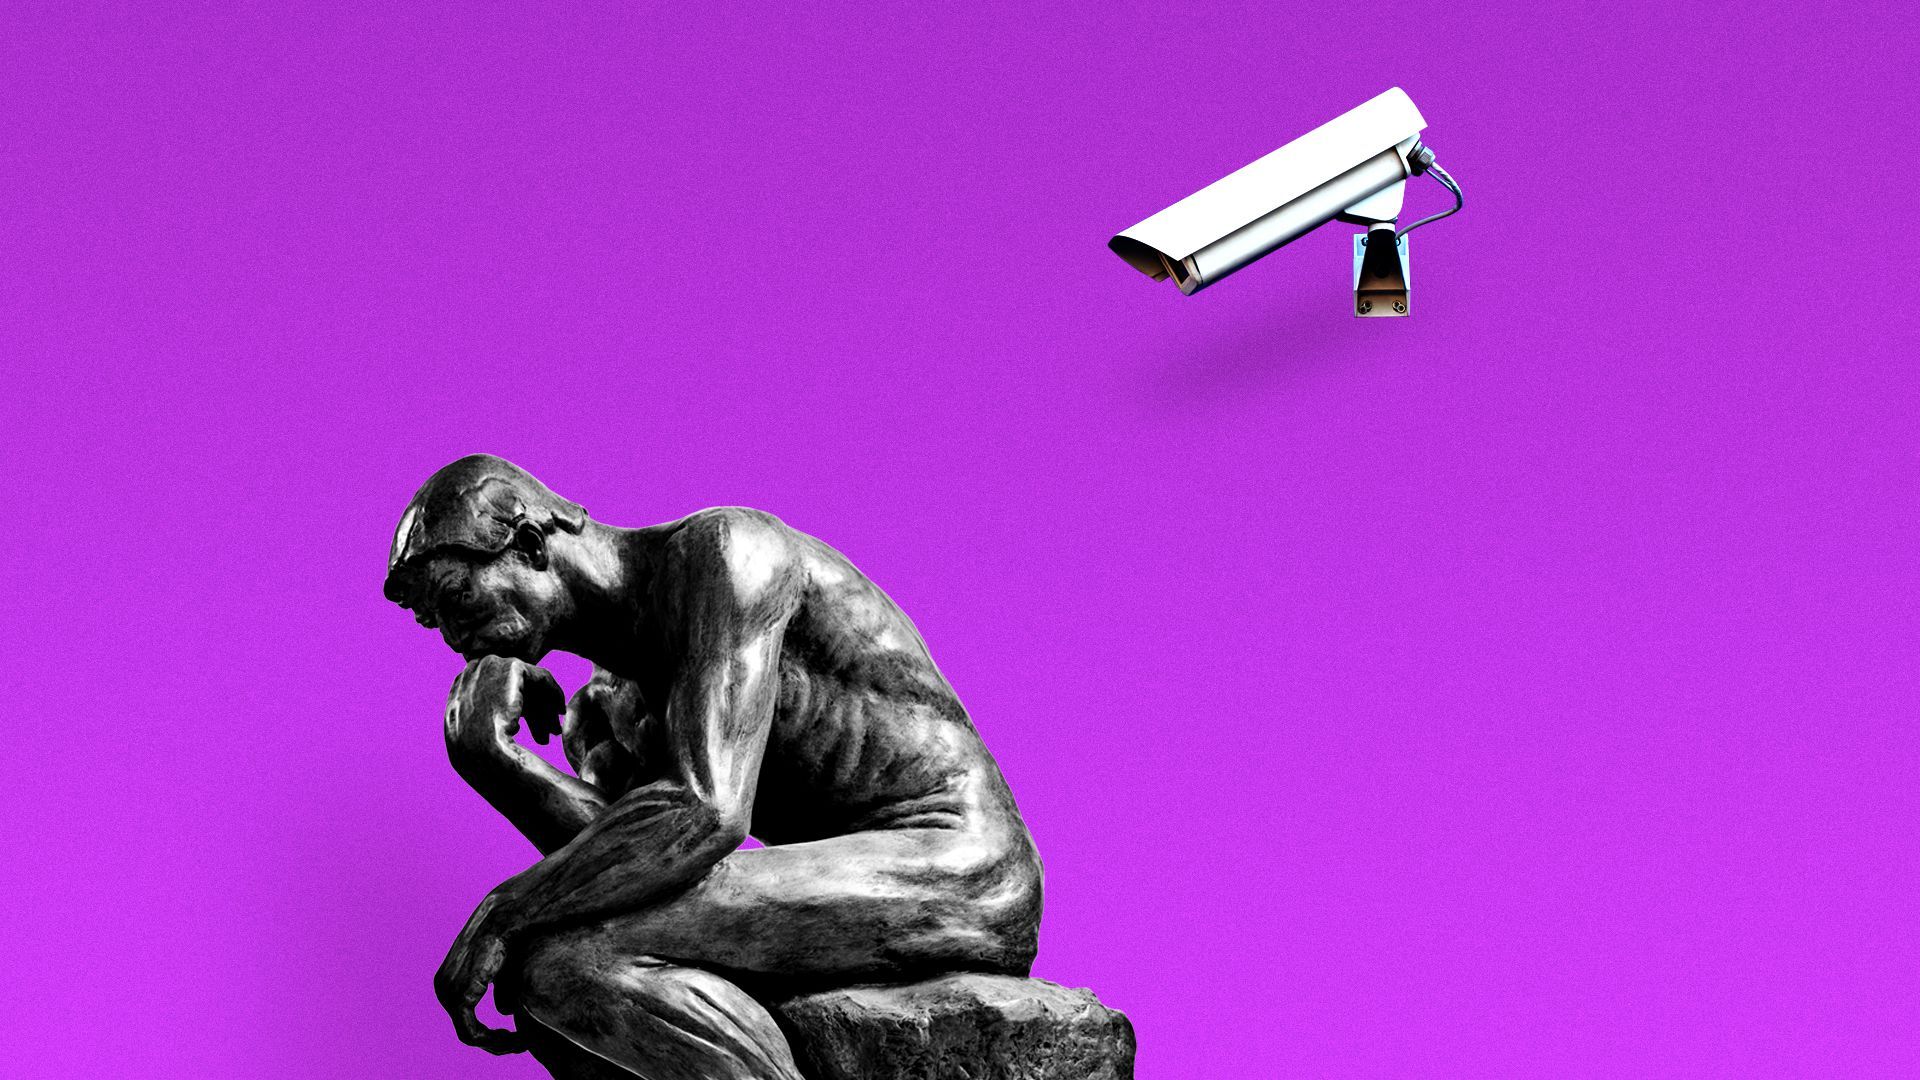 In this illustration, Thinking Man sits underneath a CCTV security camera